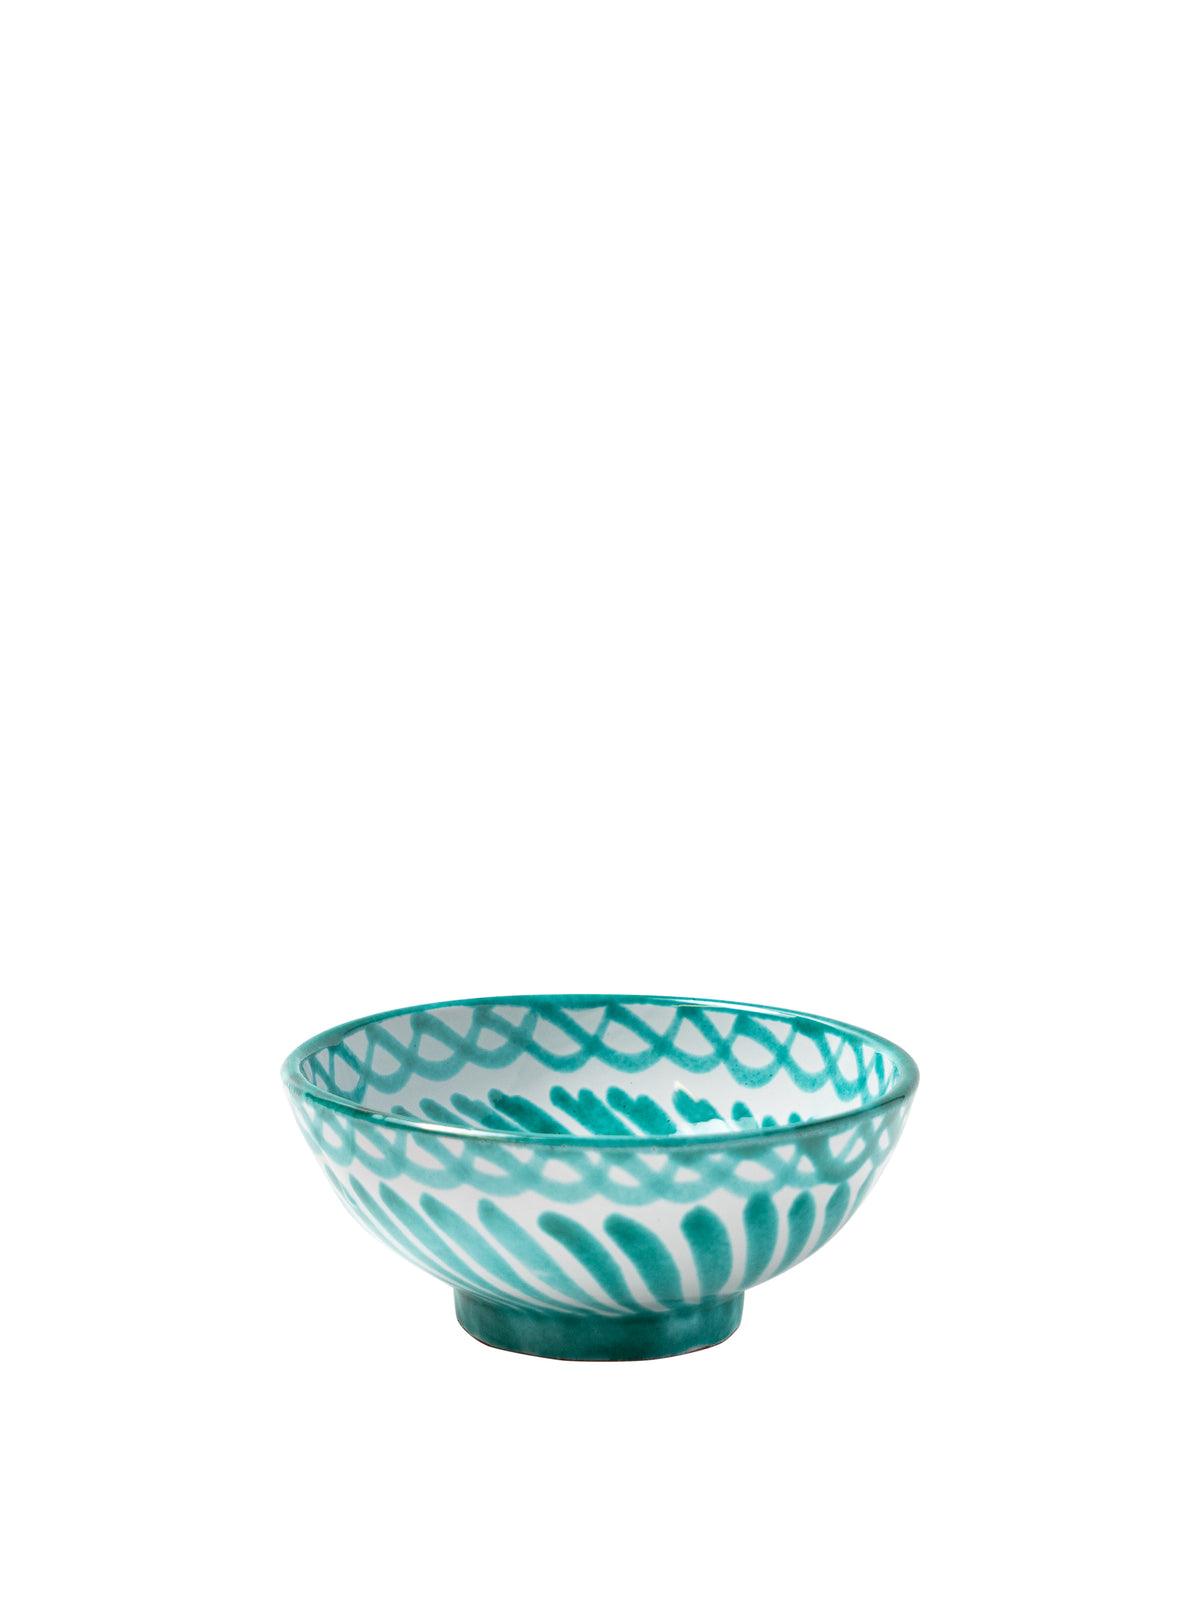 Casa Verde Small Bowl with Hand-painted Designs